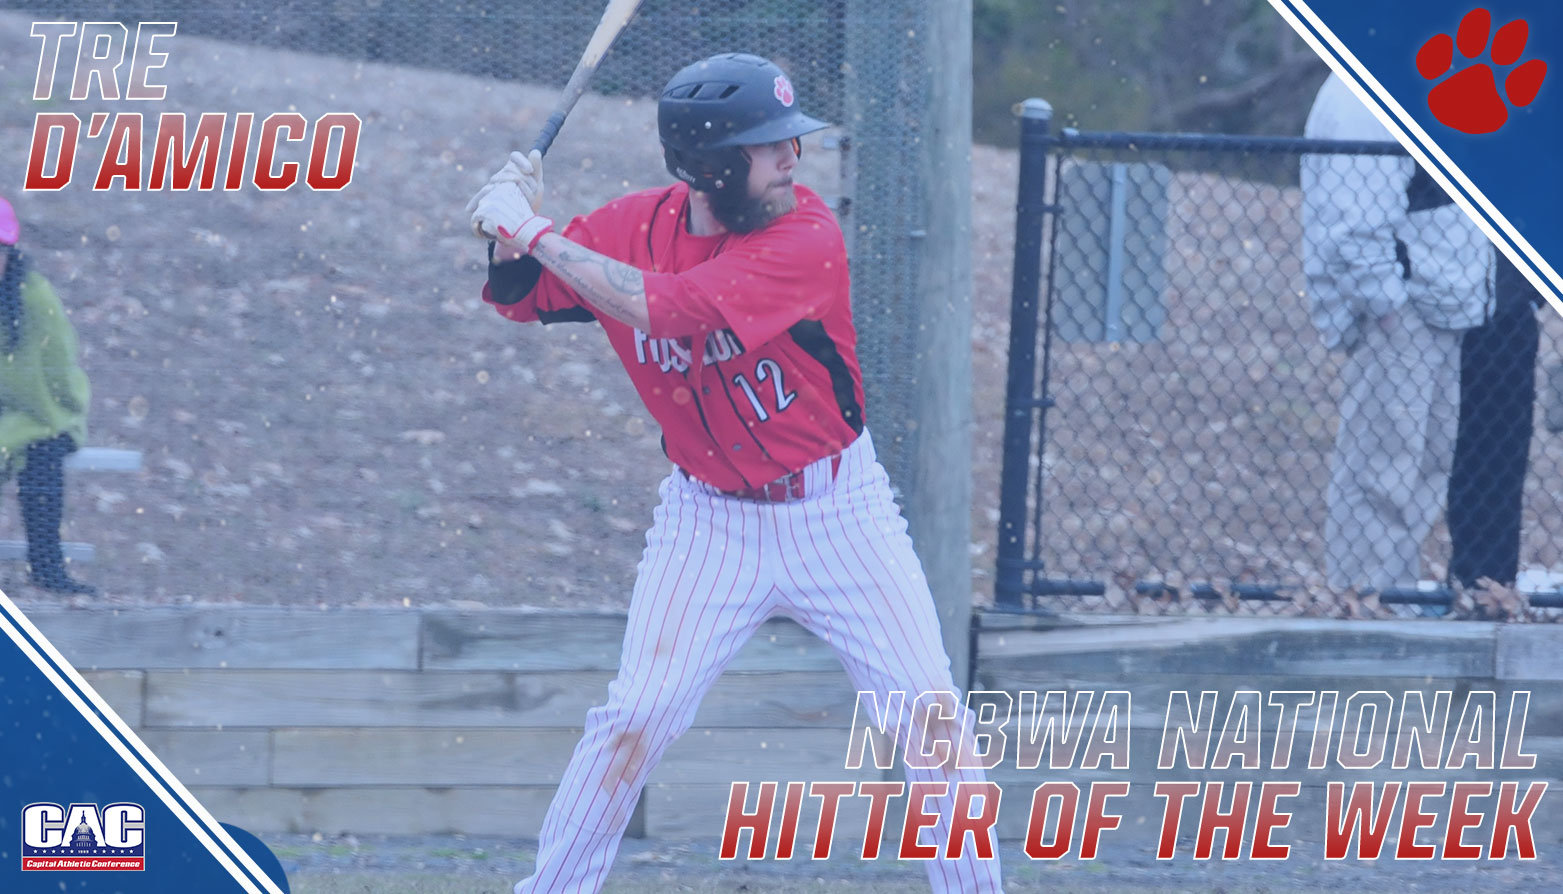 Frostburg State's Tre D'Amico Selected NCBWA National Hitter of the Week